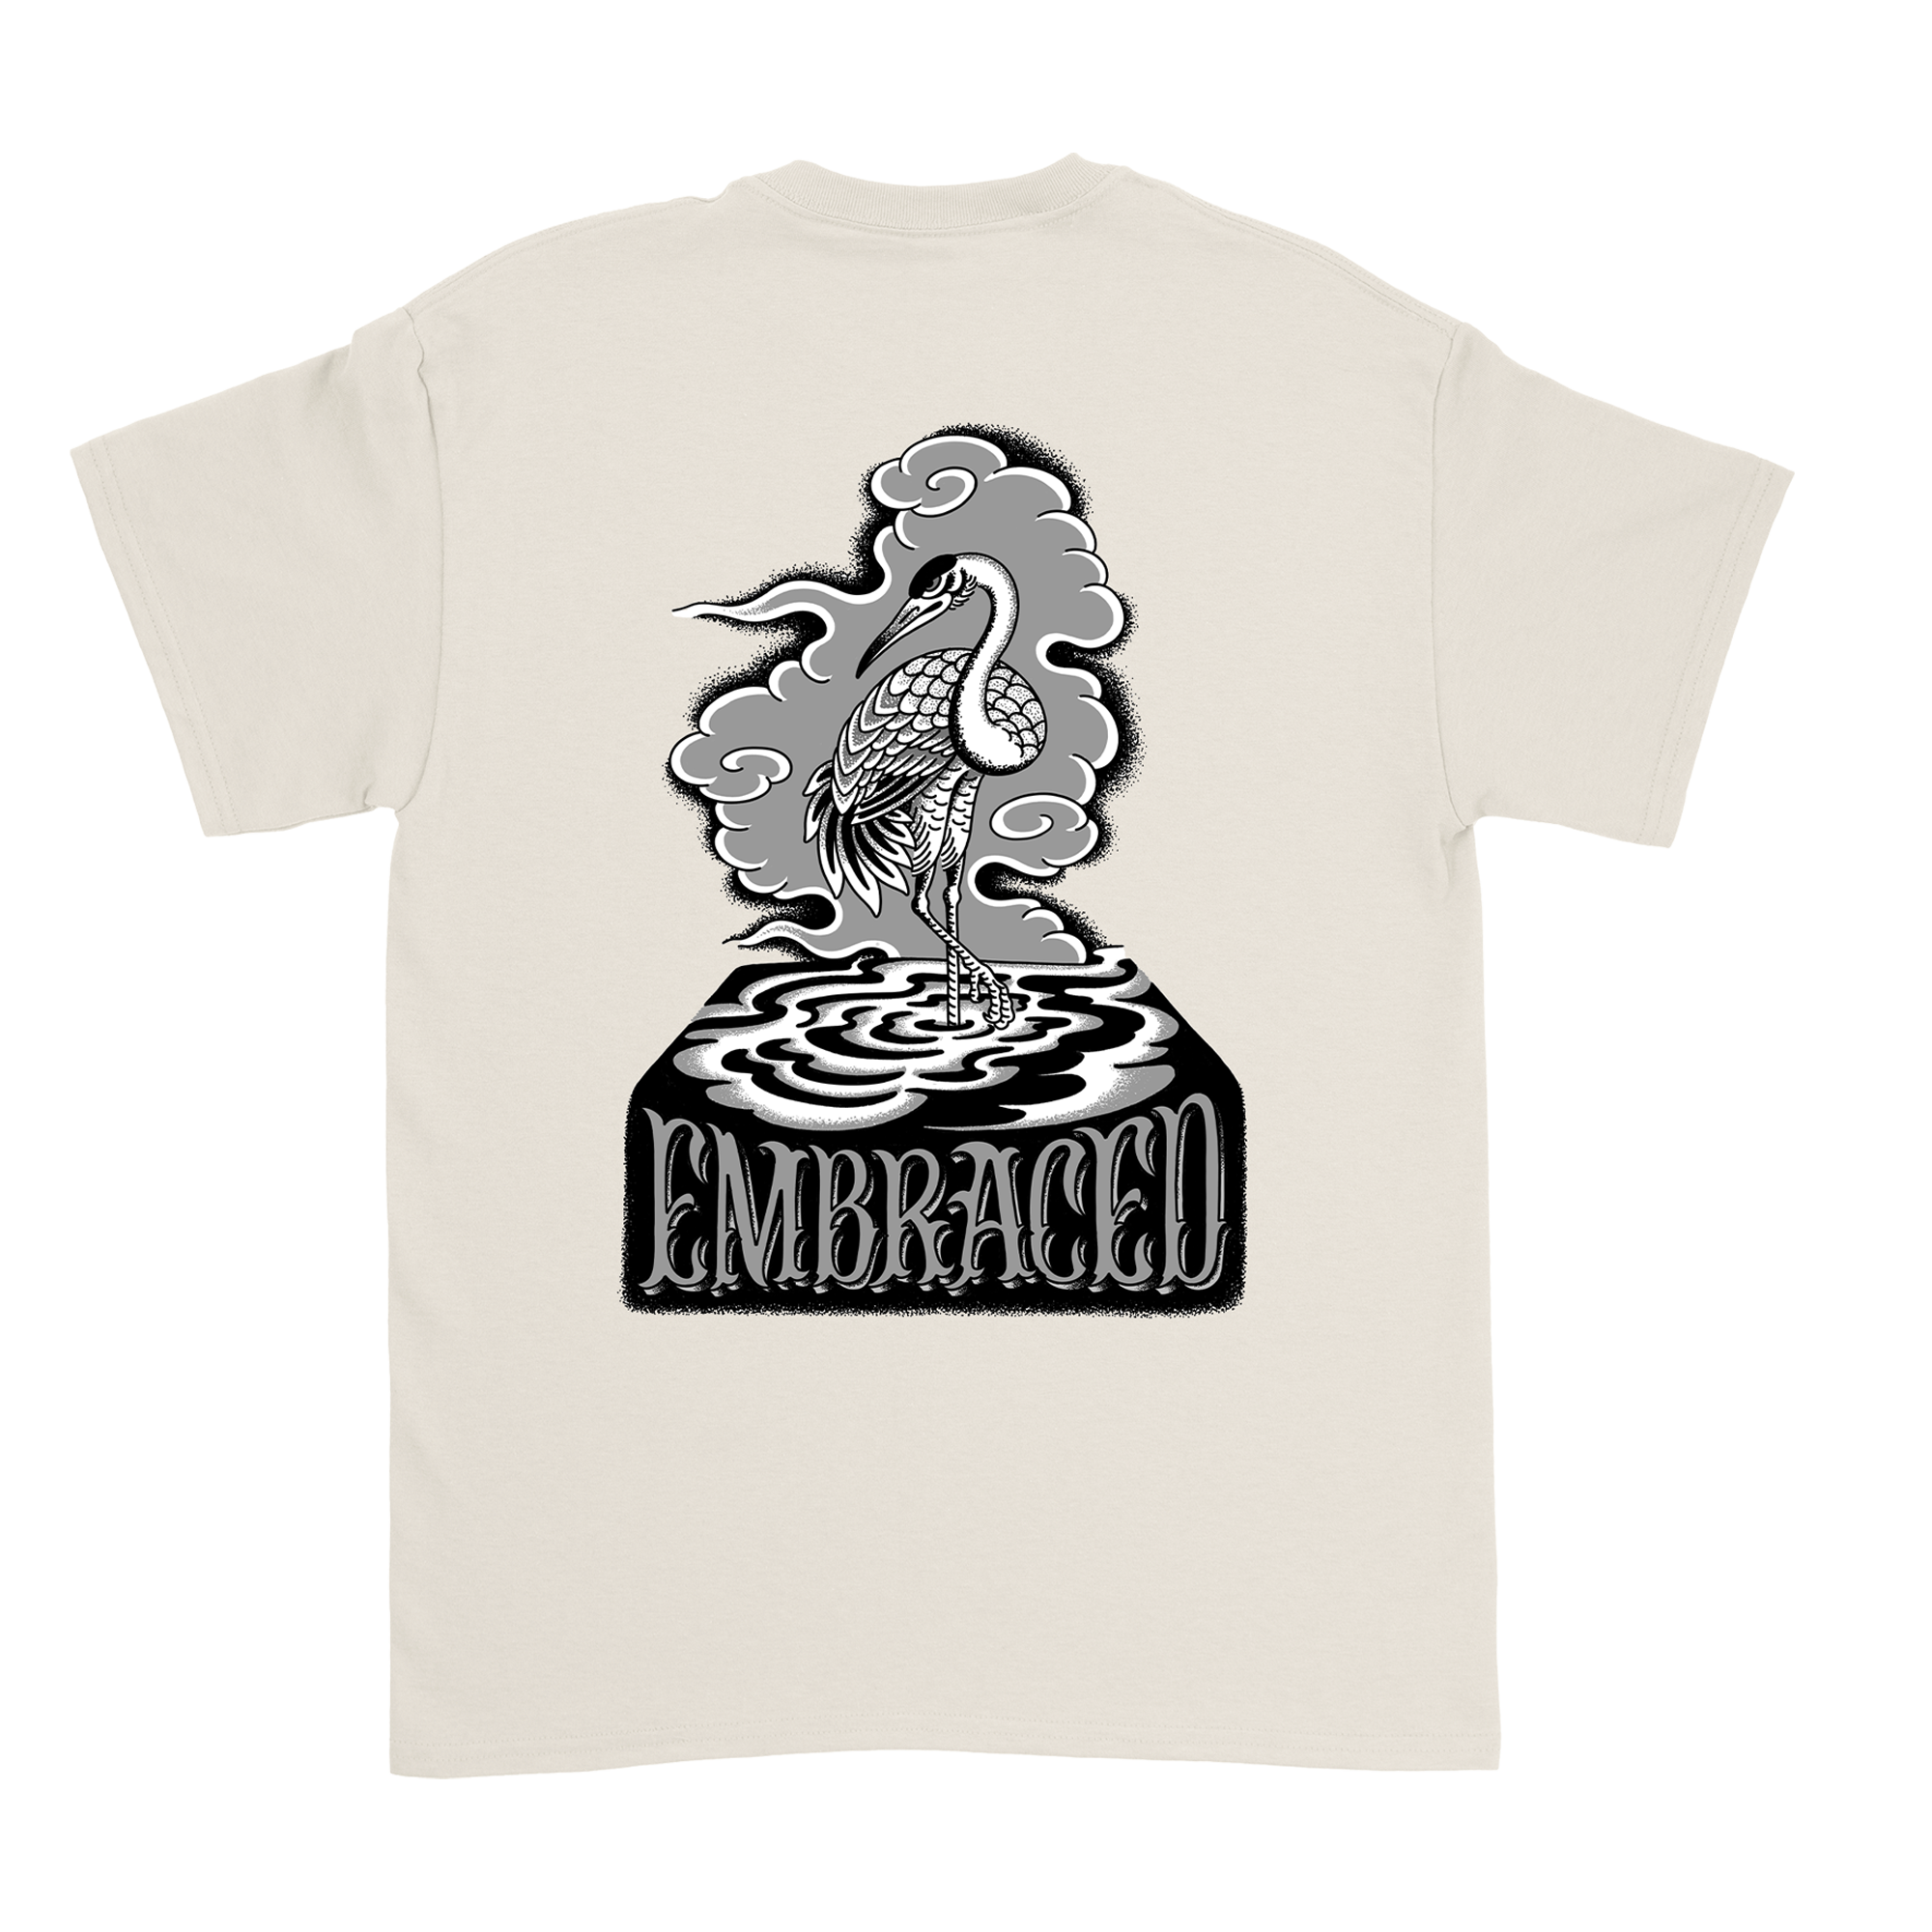 Embraced - Born and Died T-Shirt